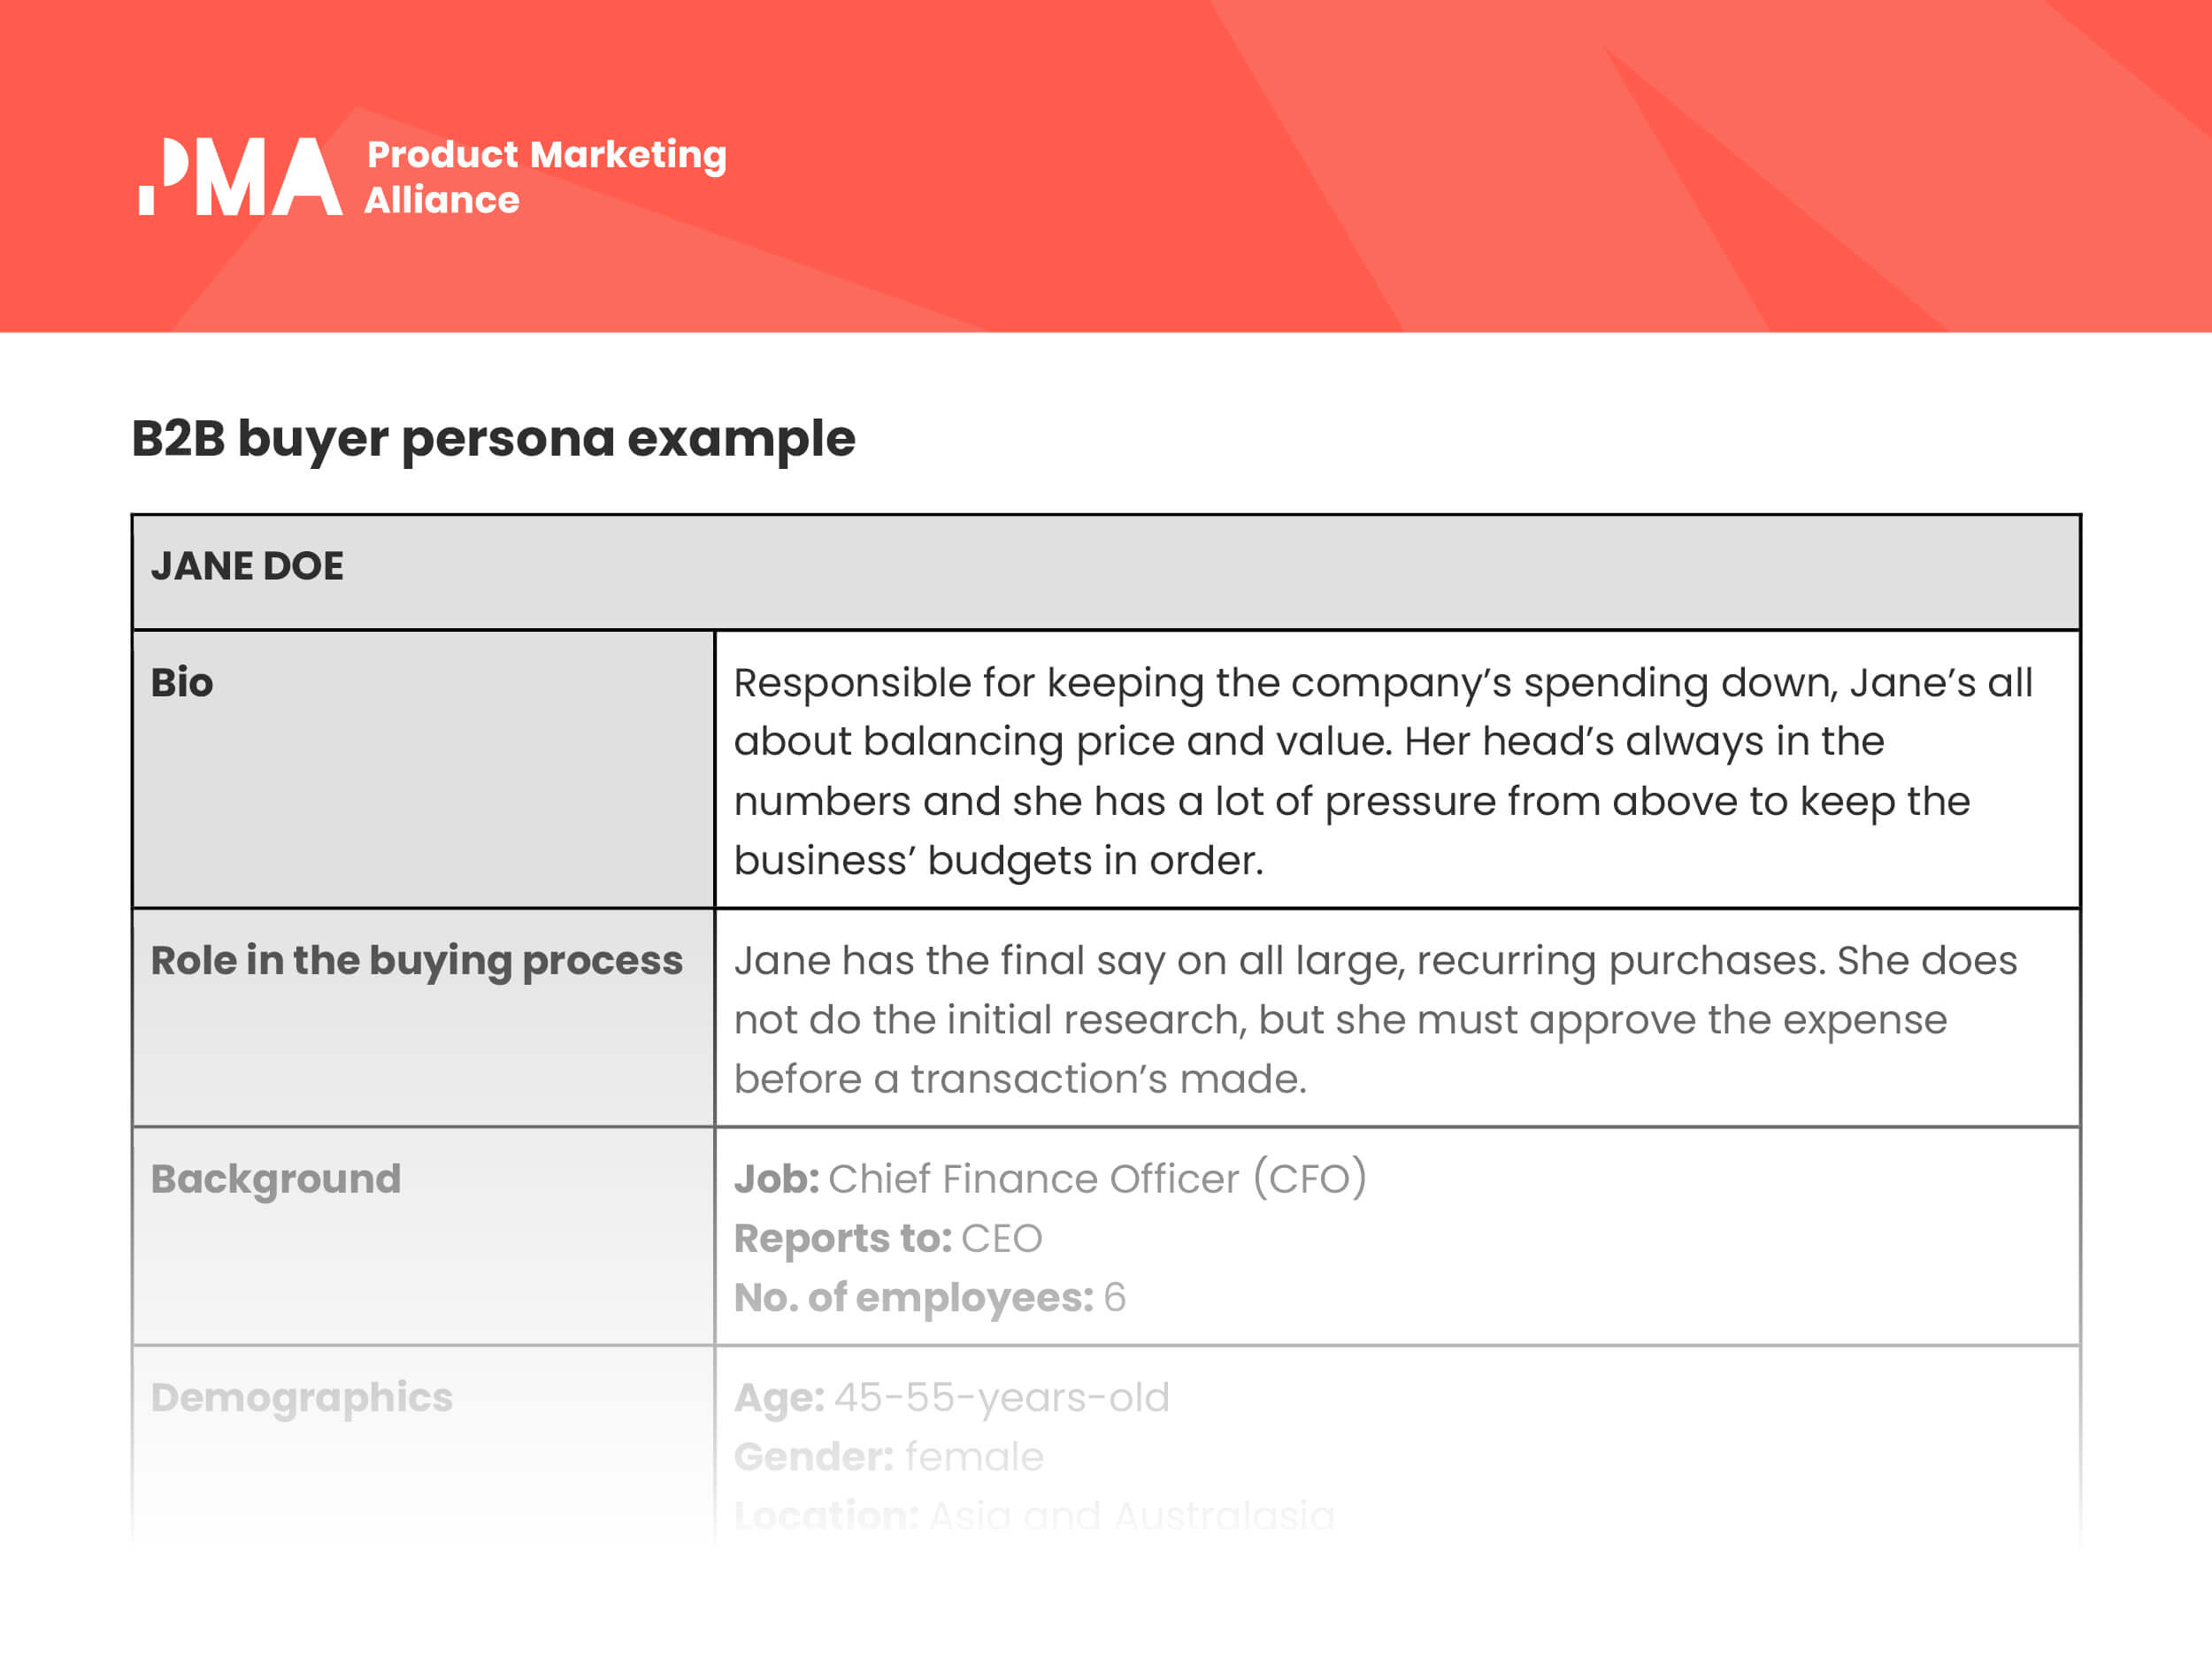 Product Marketing Alliance's B2B buyer persona example template